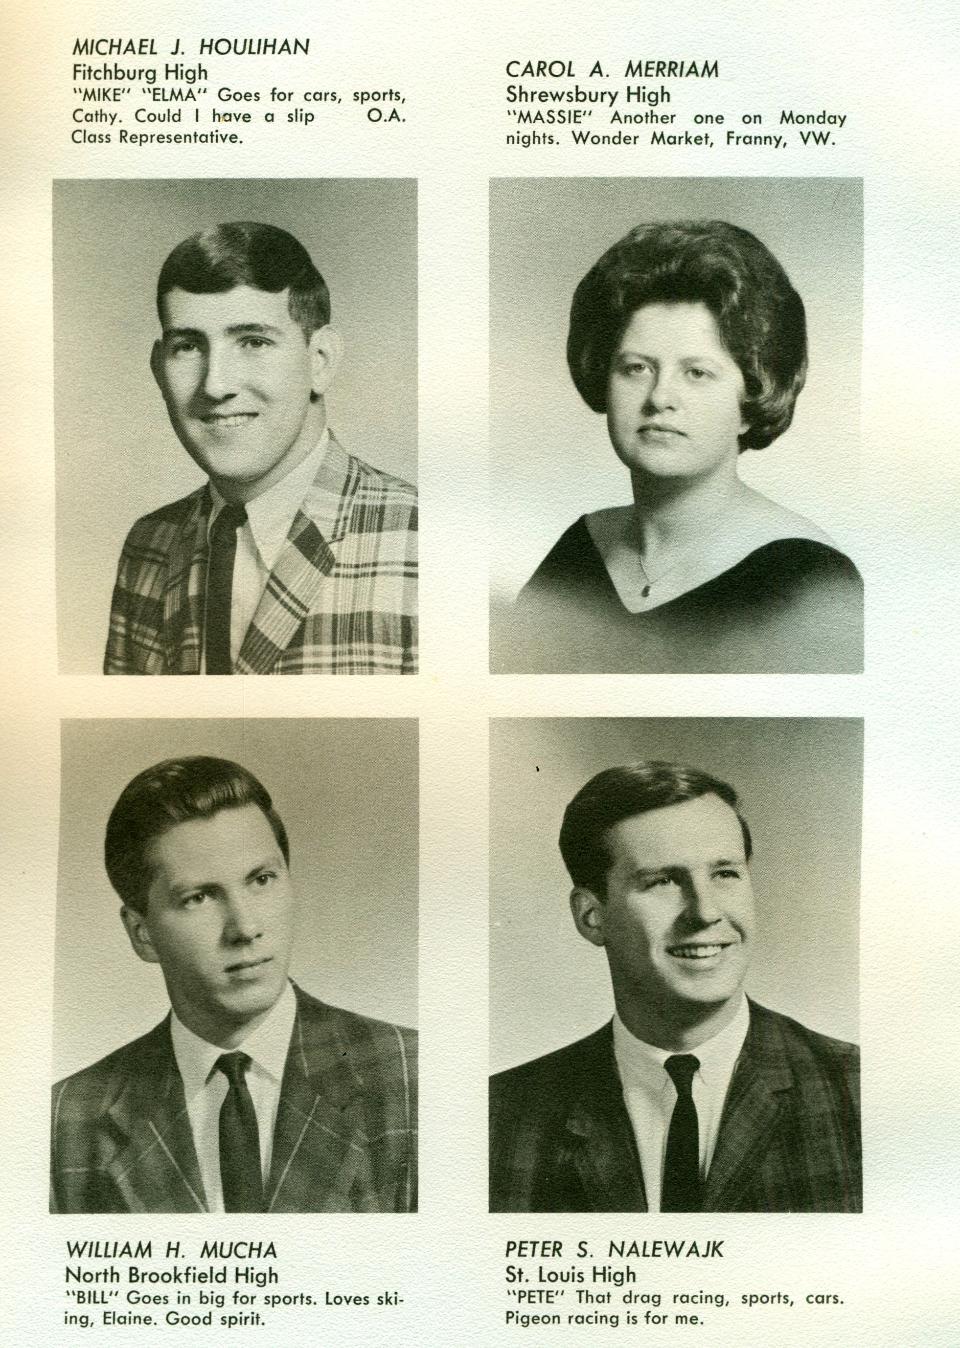 Worcester Industrial Technical Institute Class of 1967 Yearbook Data Processing